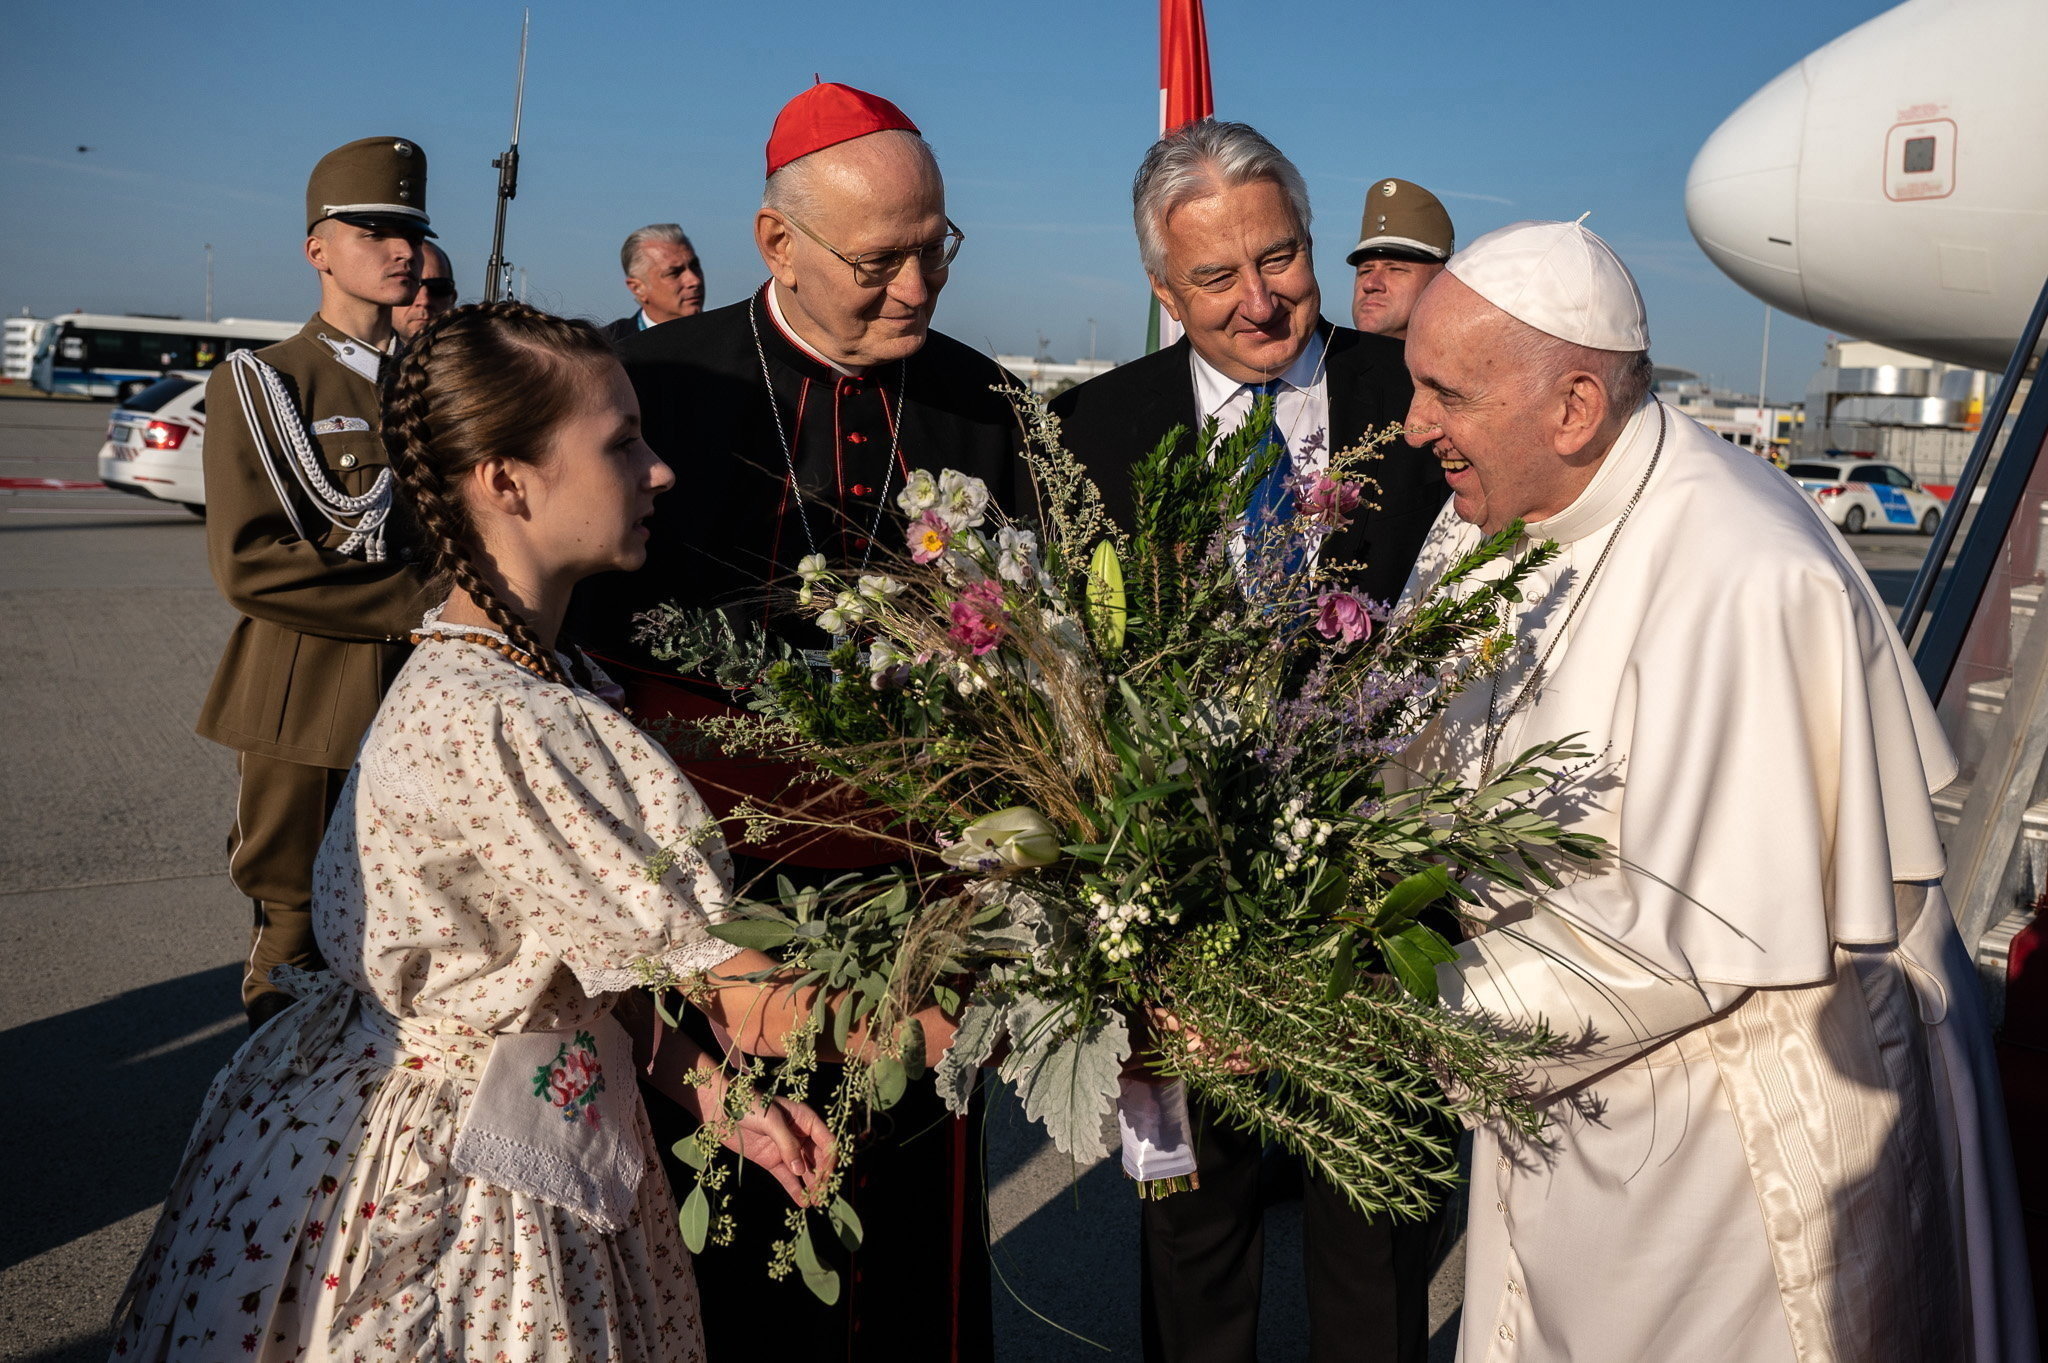 Puskás Football Jersey Among Pope’s Gifts from Hungary